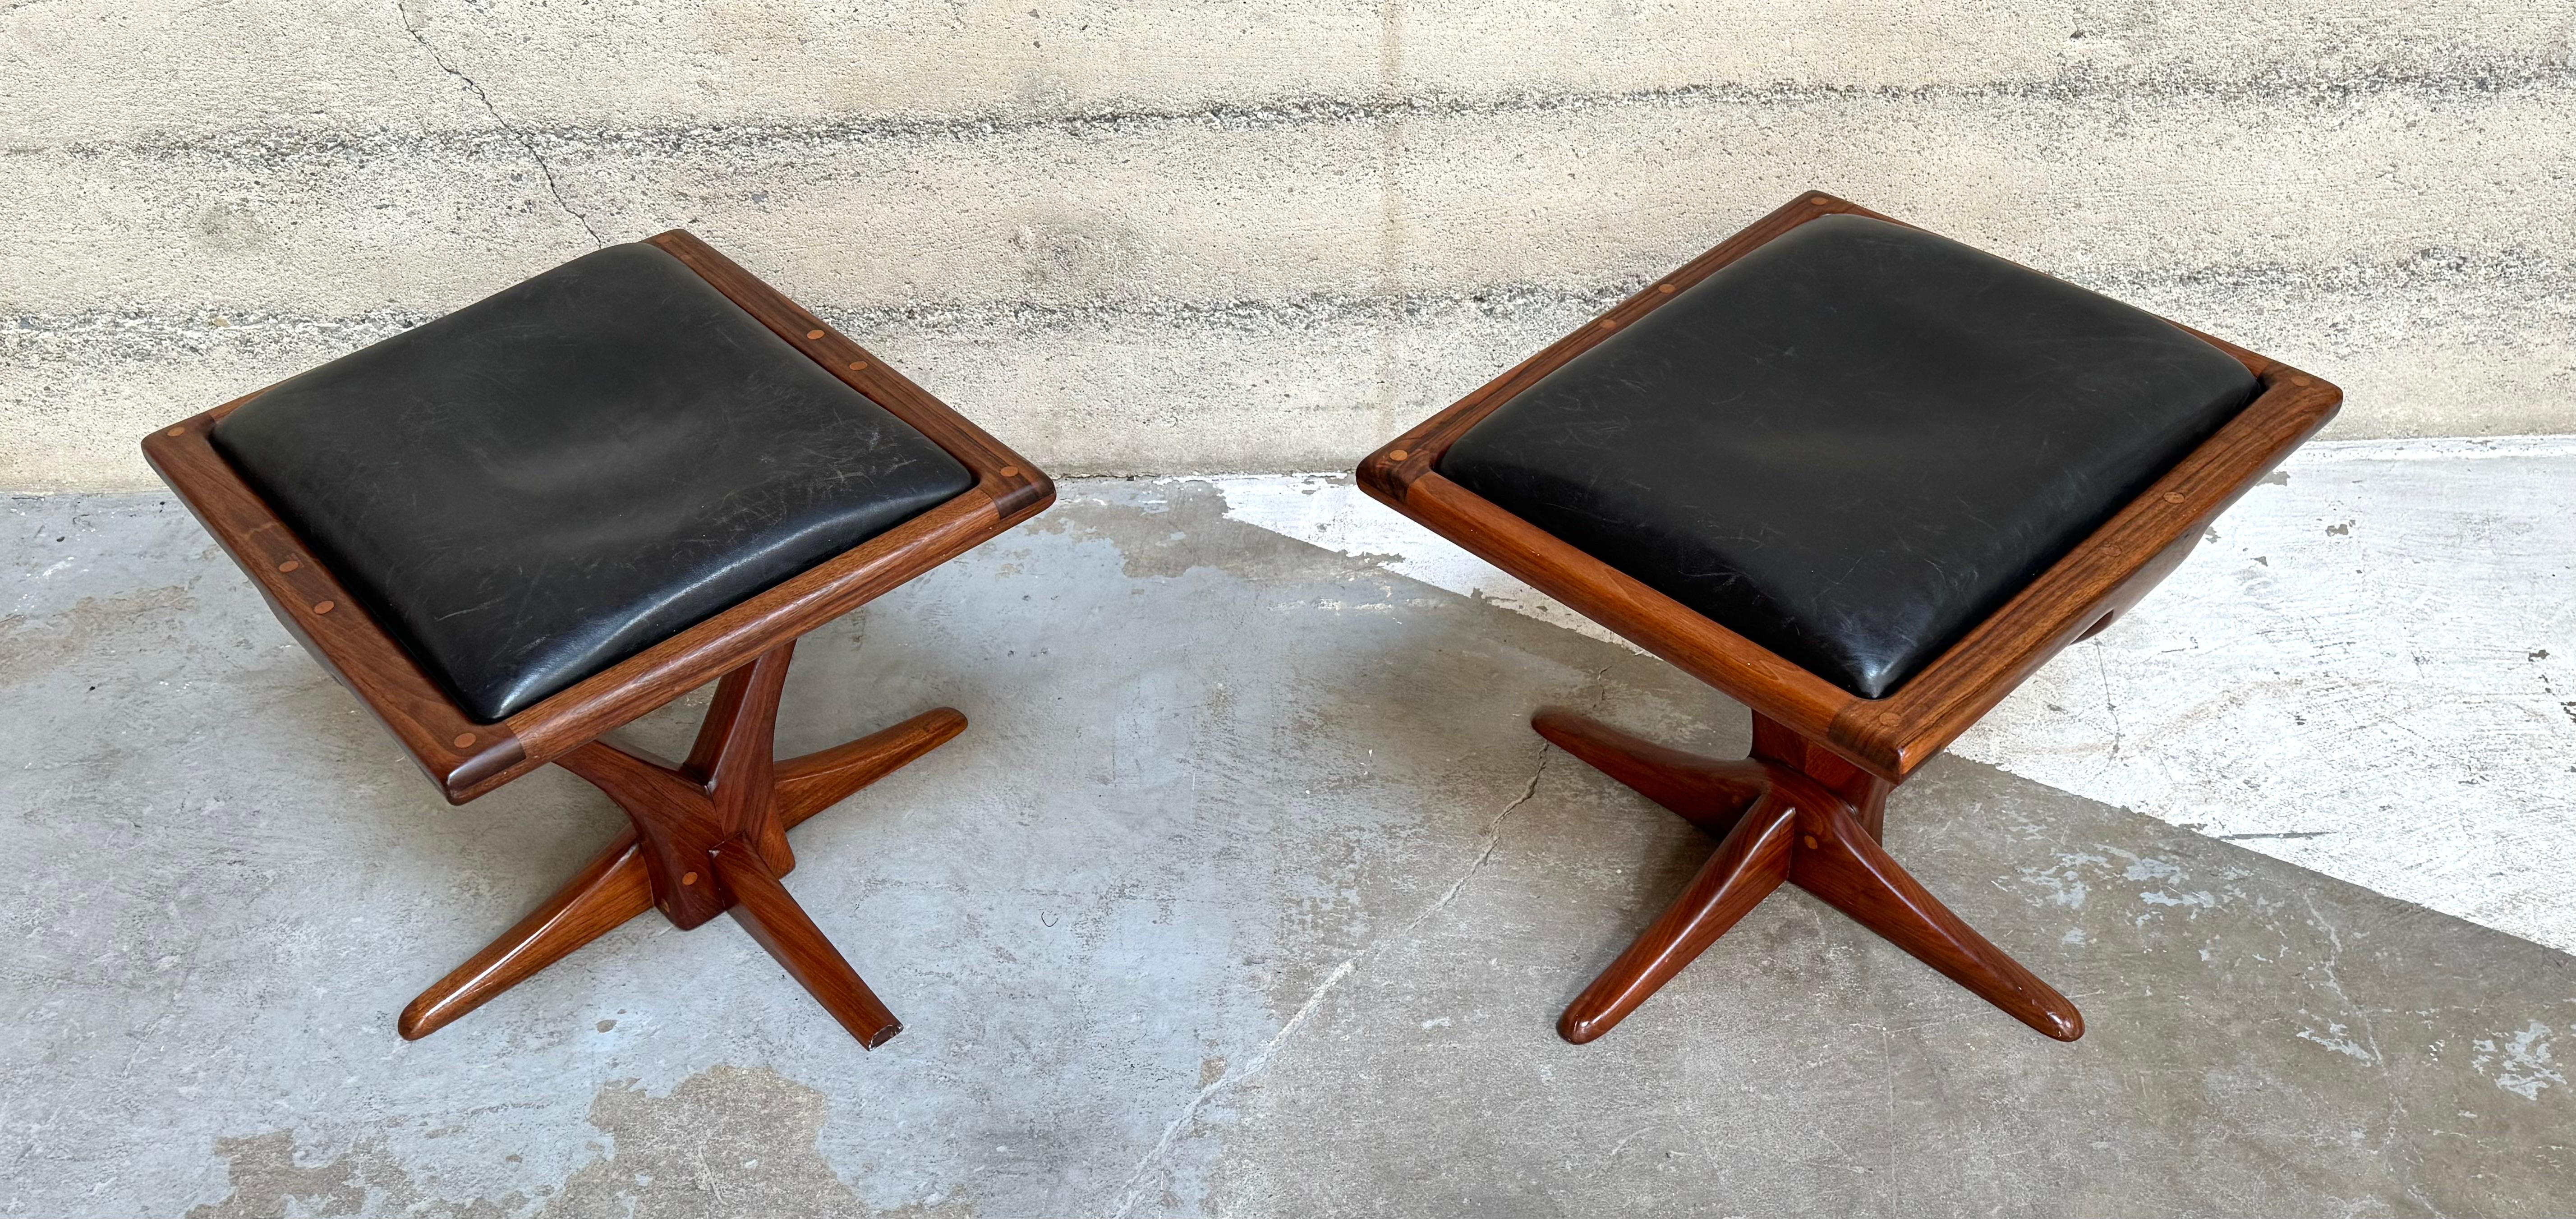 Hand-Crafted 1970s California Studio Stools For Sale